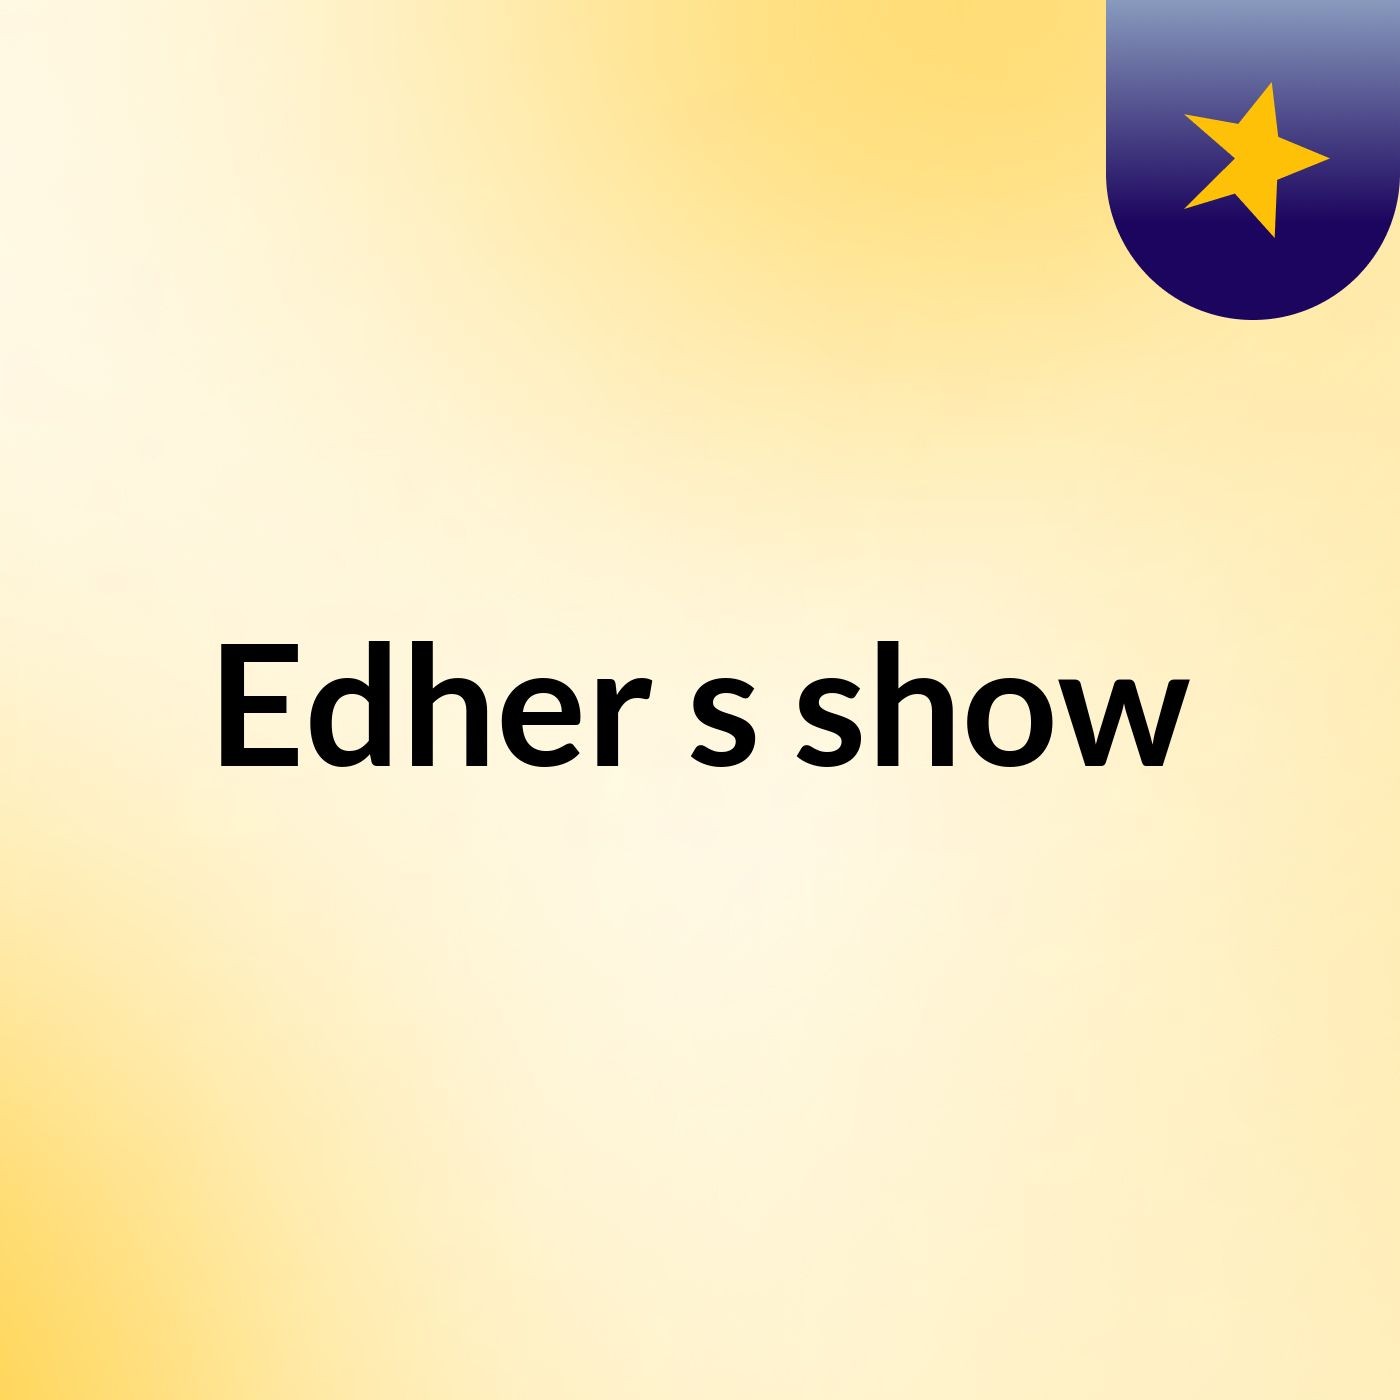 Edher's show